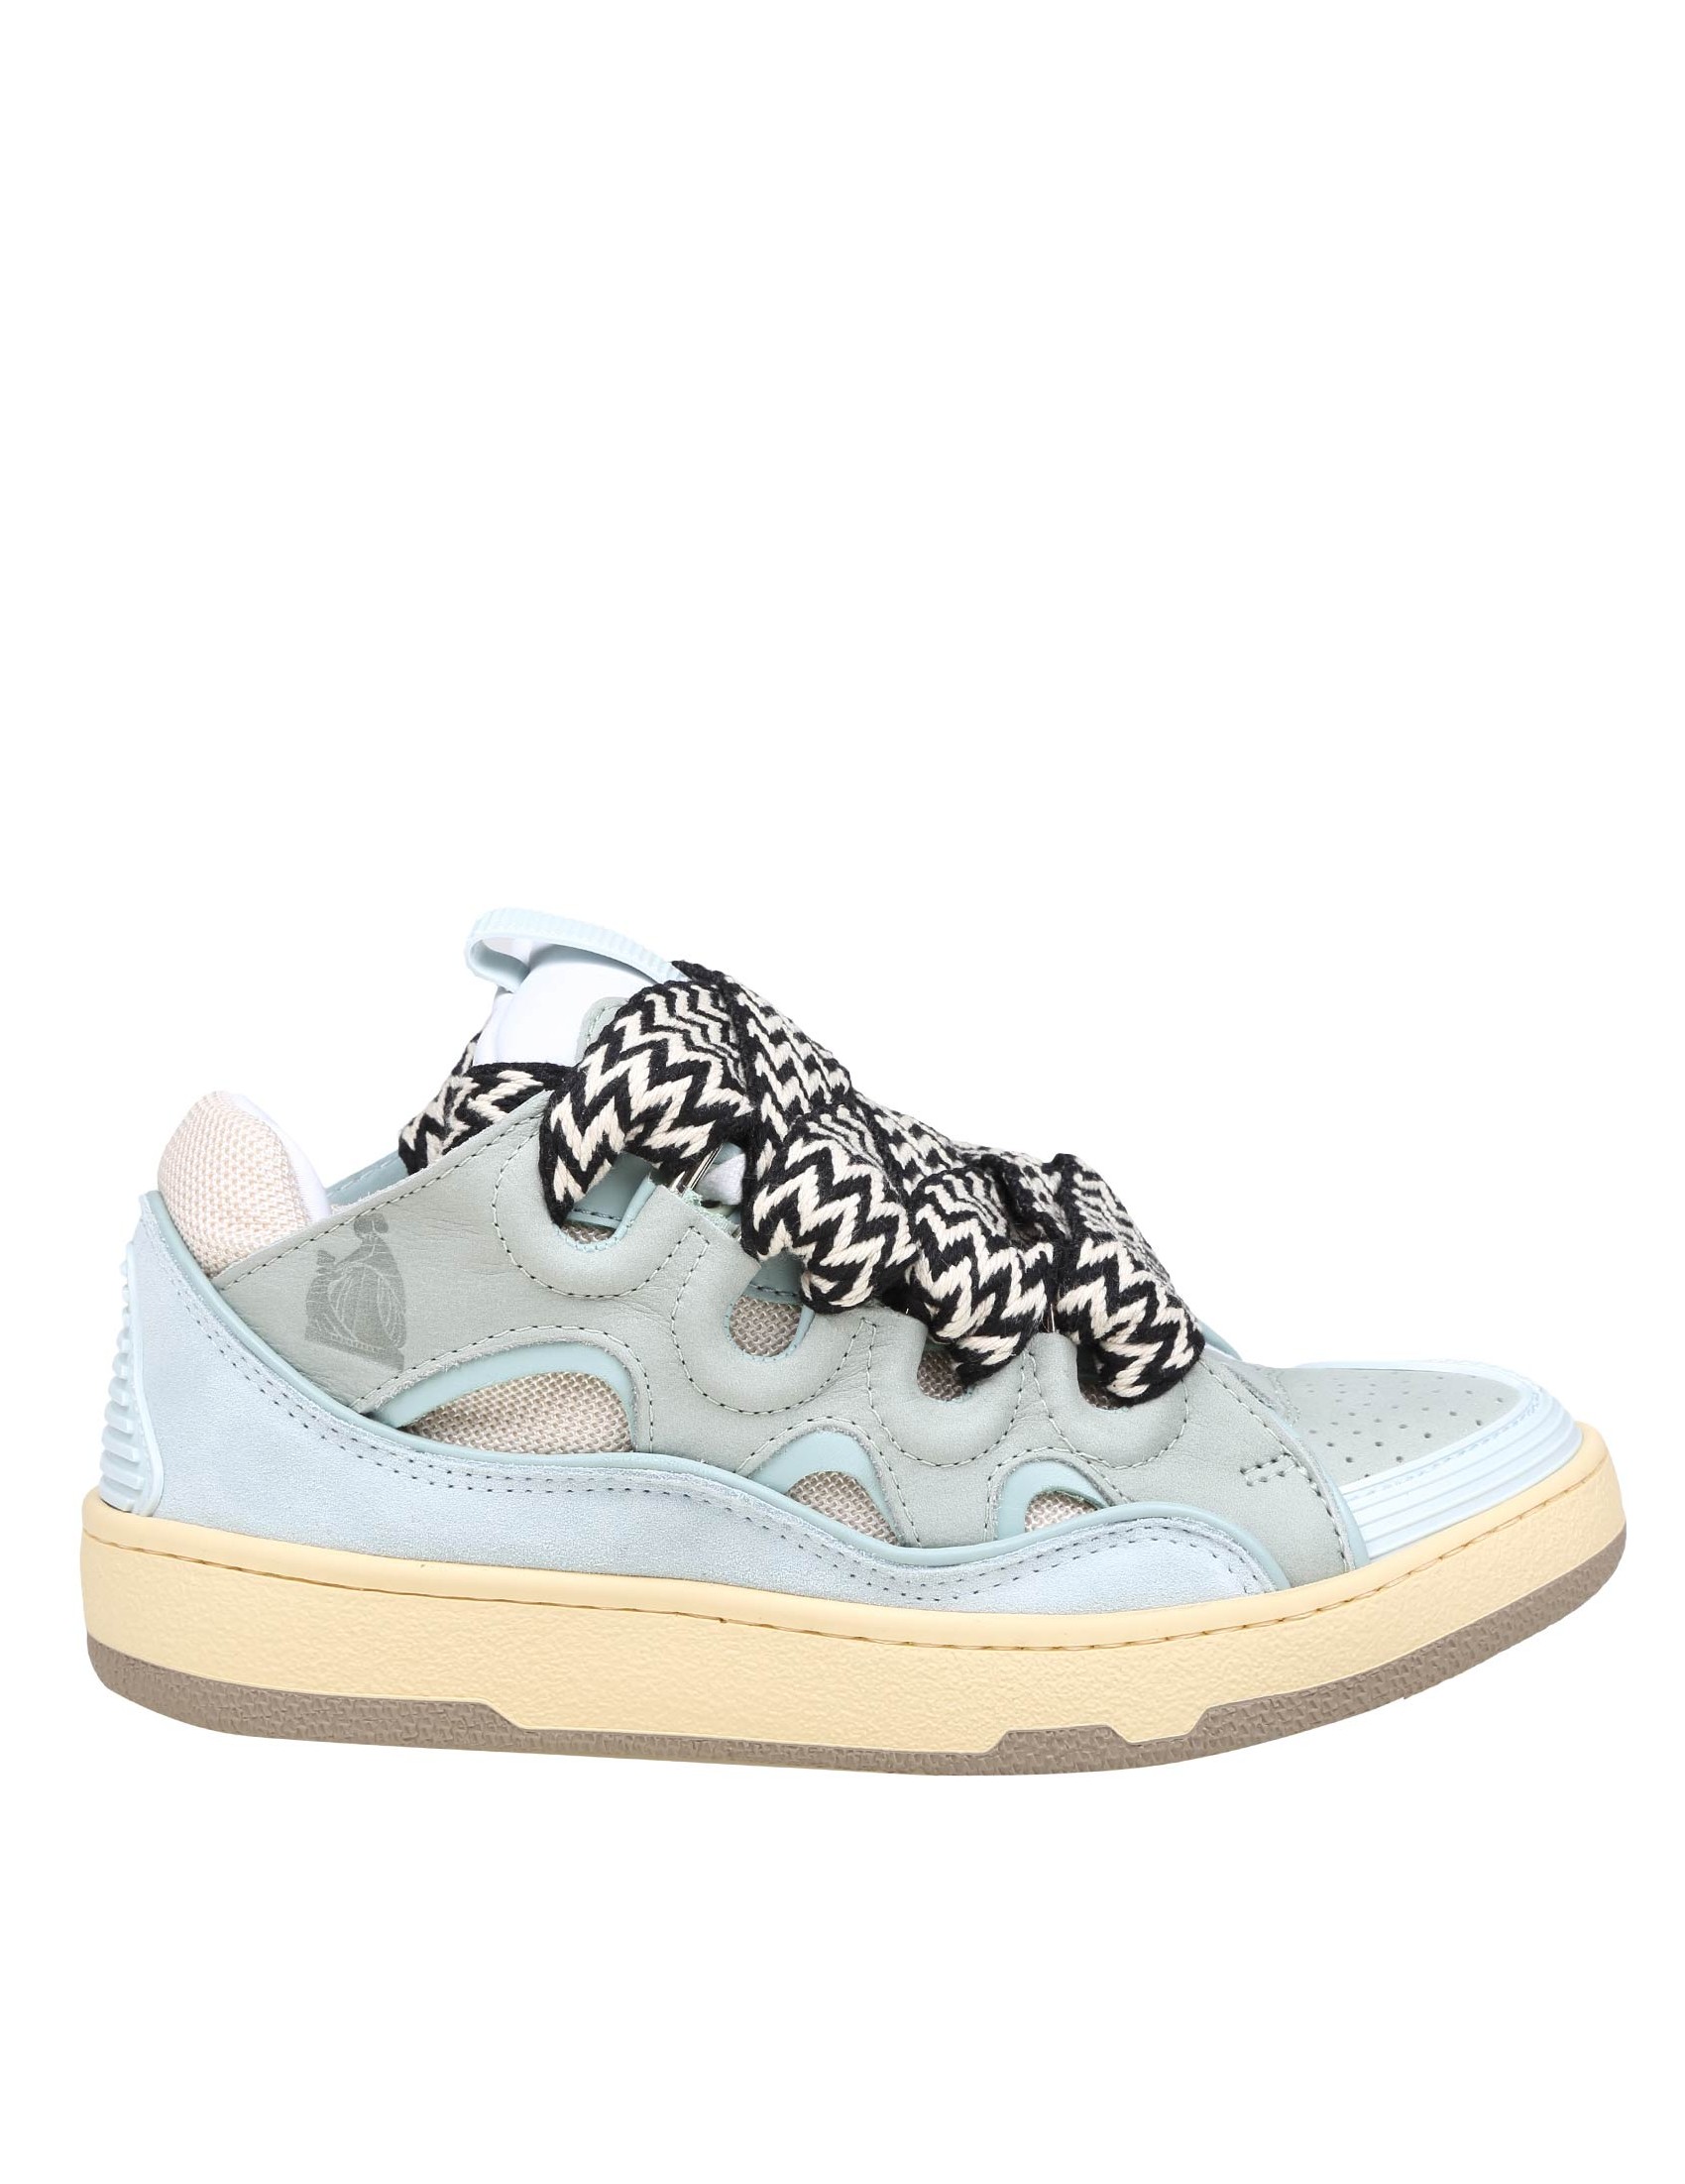 LANVIN SKATE SNEAKERS IN LEATHER COLOR LIGHT BLUE